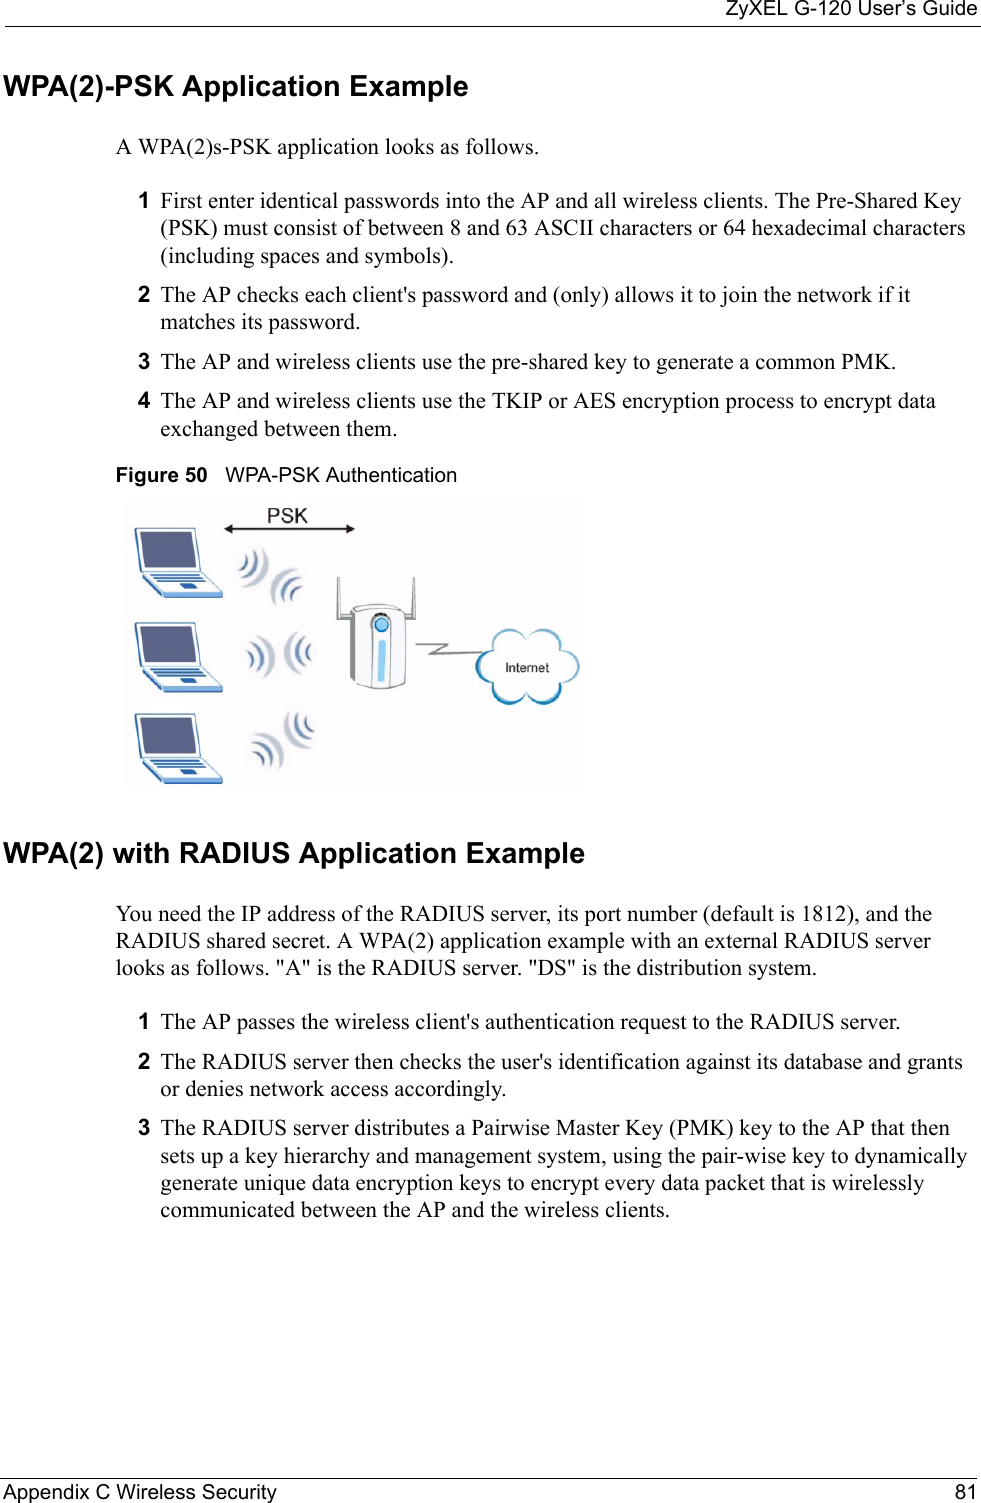 ZyXEL G-120 User’s GuideAppendix C Wireless Security 81WPA(2)-PSK Application ExampleA WPA(2)s-PSK application looks as follows.1First enter identical passwords into the AP and all wireless clients. The Pre-Shared Key (PSK) must consist of between 8 and 63 ASCII characters or 64 hexadecimal characters (including spaces and symbols).2The AP checks each client&apos;s password and (only) allows it to join the network if it matches its password.3The AP and wireless clients use the pre-shared key to generate a common PMK.4The AP and wireless clients use the TKIP or AES encryption process to encrypt data exchanged between them.Figure 50   WPA-PSK AuthenticationWPA(2) with RADIUS Application ExampleYou need the IP address of the RADIUS server, its port number (default is 1812), and the RADIUS shared secret. A WPA(2) application example with an external RADIUS server looks as follows. &quot;A&quot; is the RADIUS server. &quot;DS&quot; is the distribution system.1The AP passes the wireless client&apos;s authentication request to the RADIUS server.2The RADIUS server then checks the user&apos;s identification against its database and grants or denies network access accordingly.3The RADIUS server distributes a Pairwise Master Key (PMK) key to the AP that then sets up a key hierarchy and management system, using the pair-wise key to dynamically generate unique data encryption keys to encrypt every data packet that is wirelessly communicated between the AP and the wireless clients.